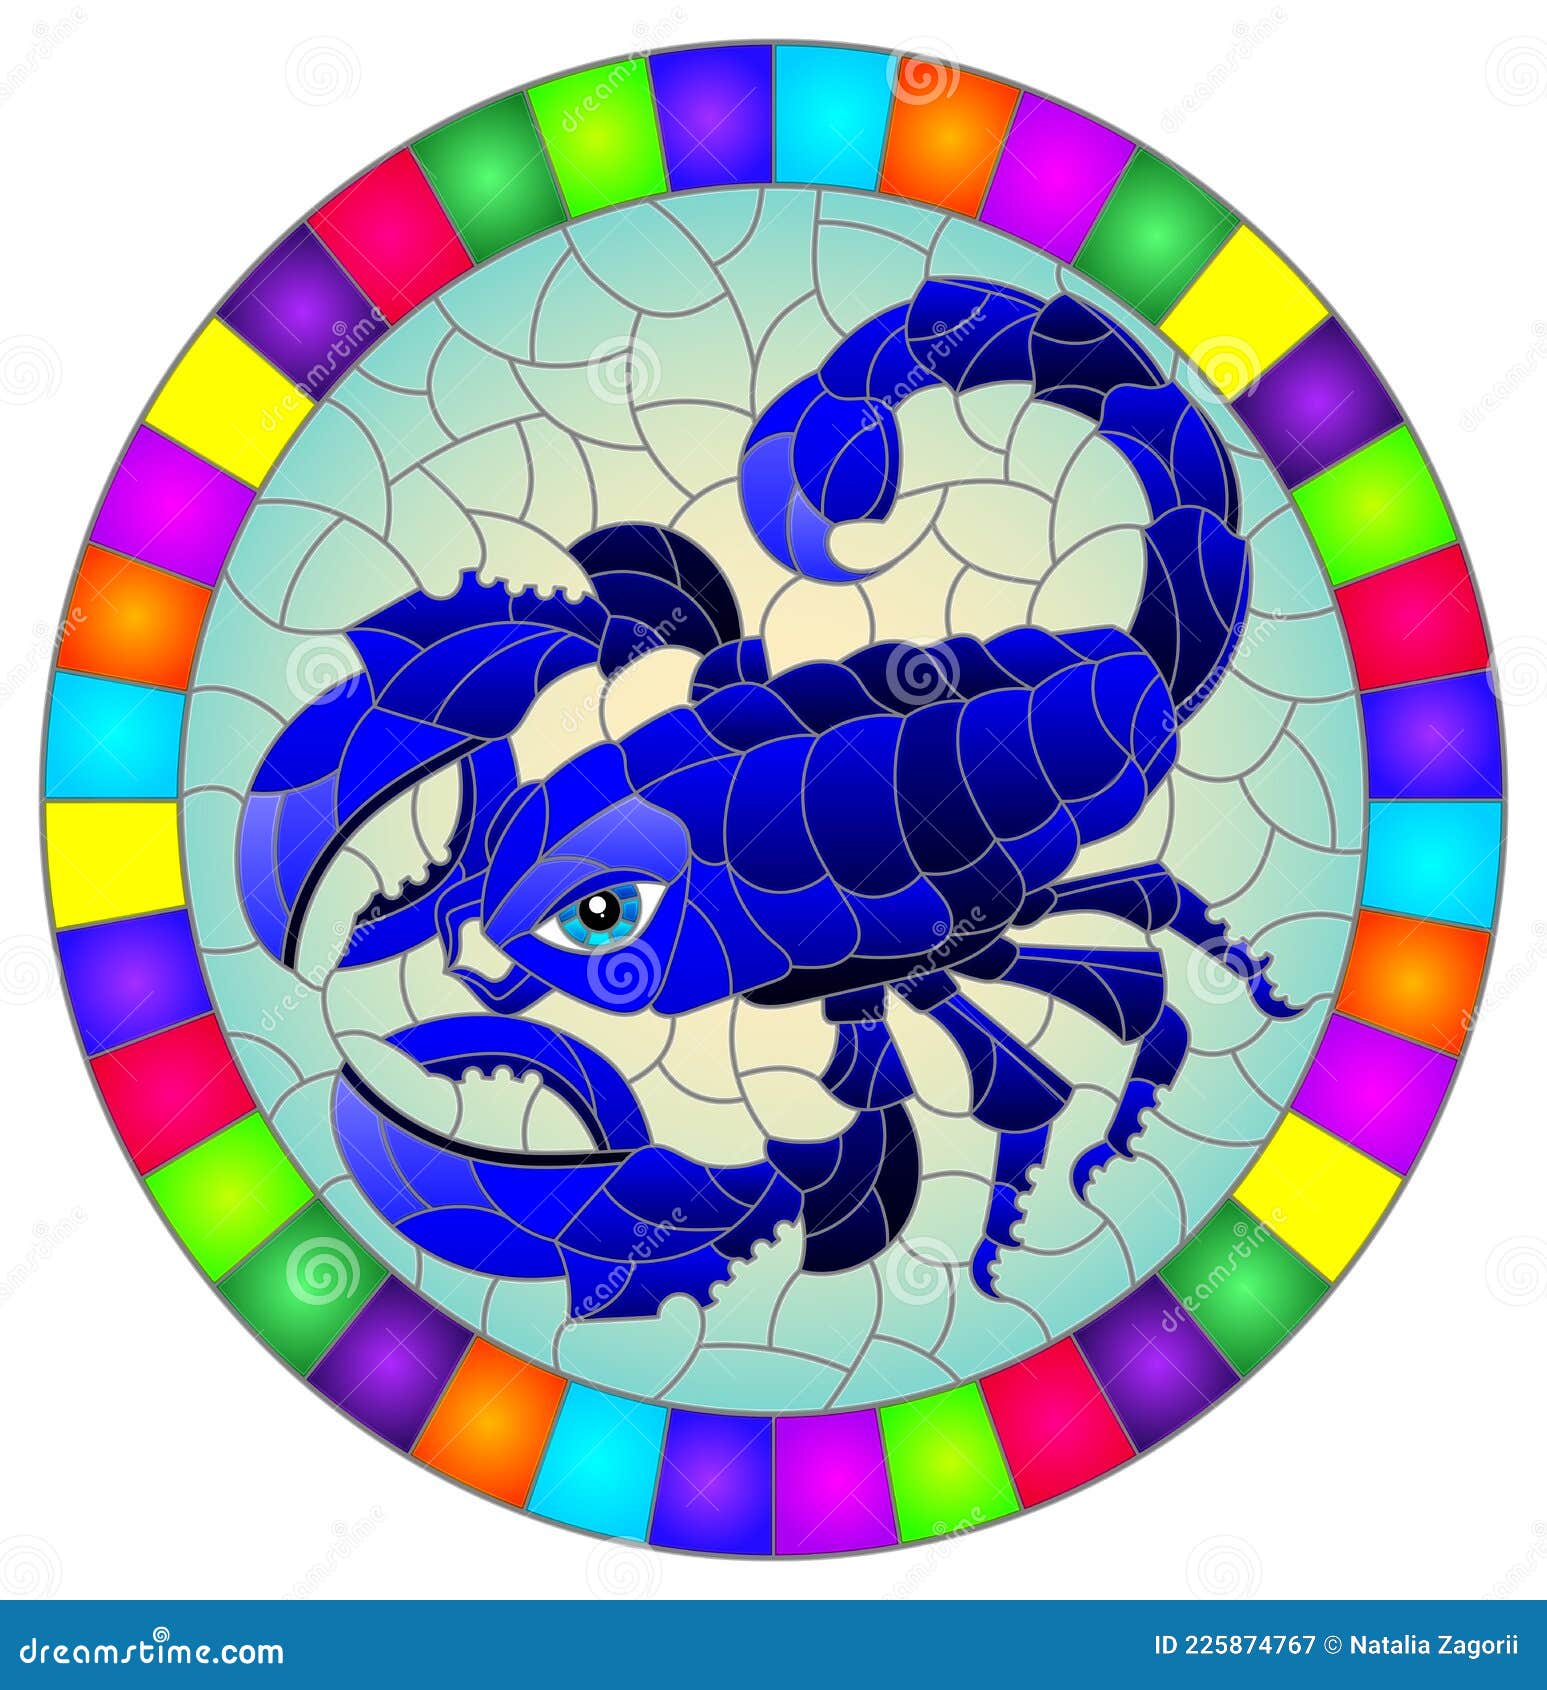 Stained Glass Illustration with a Bright Blue Scorpion, a Oval Image in ...